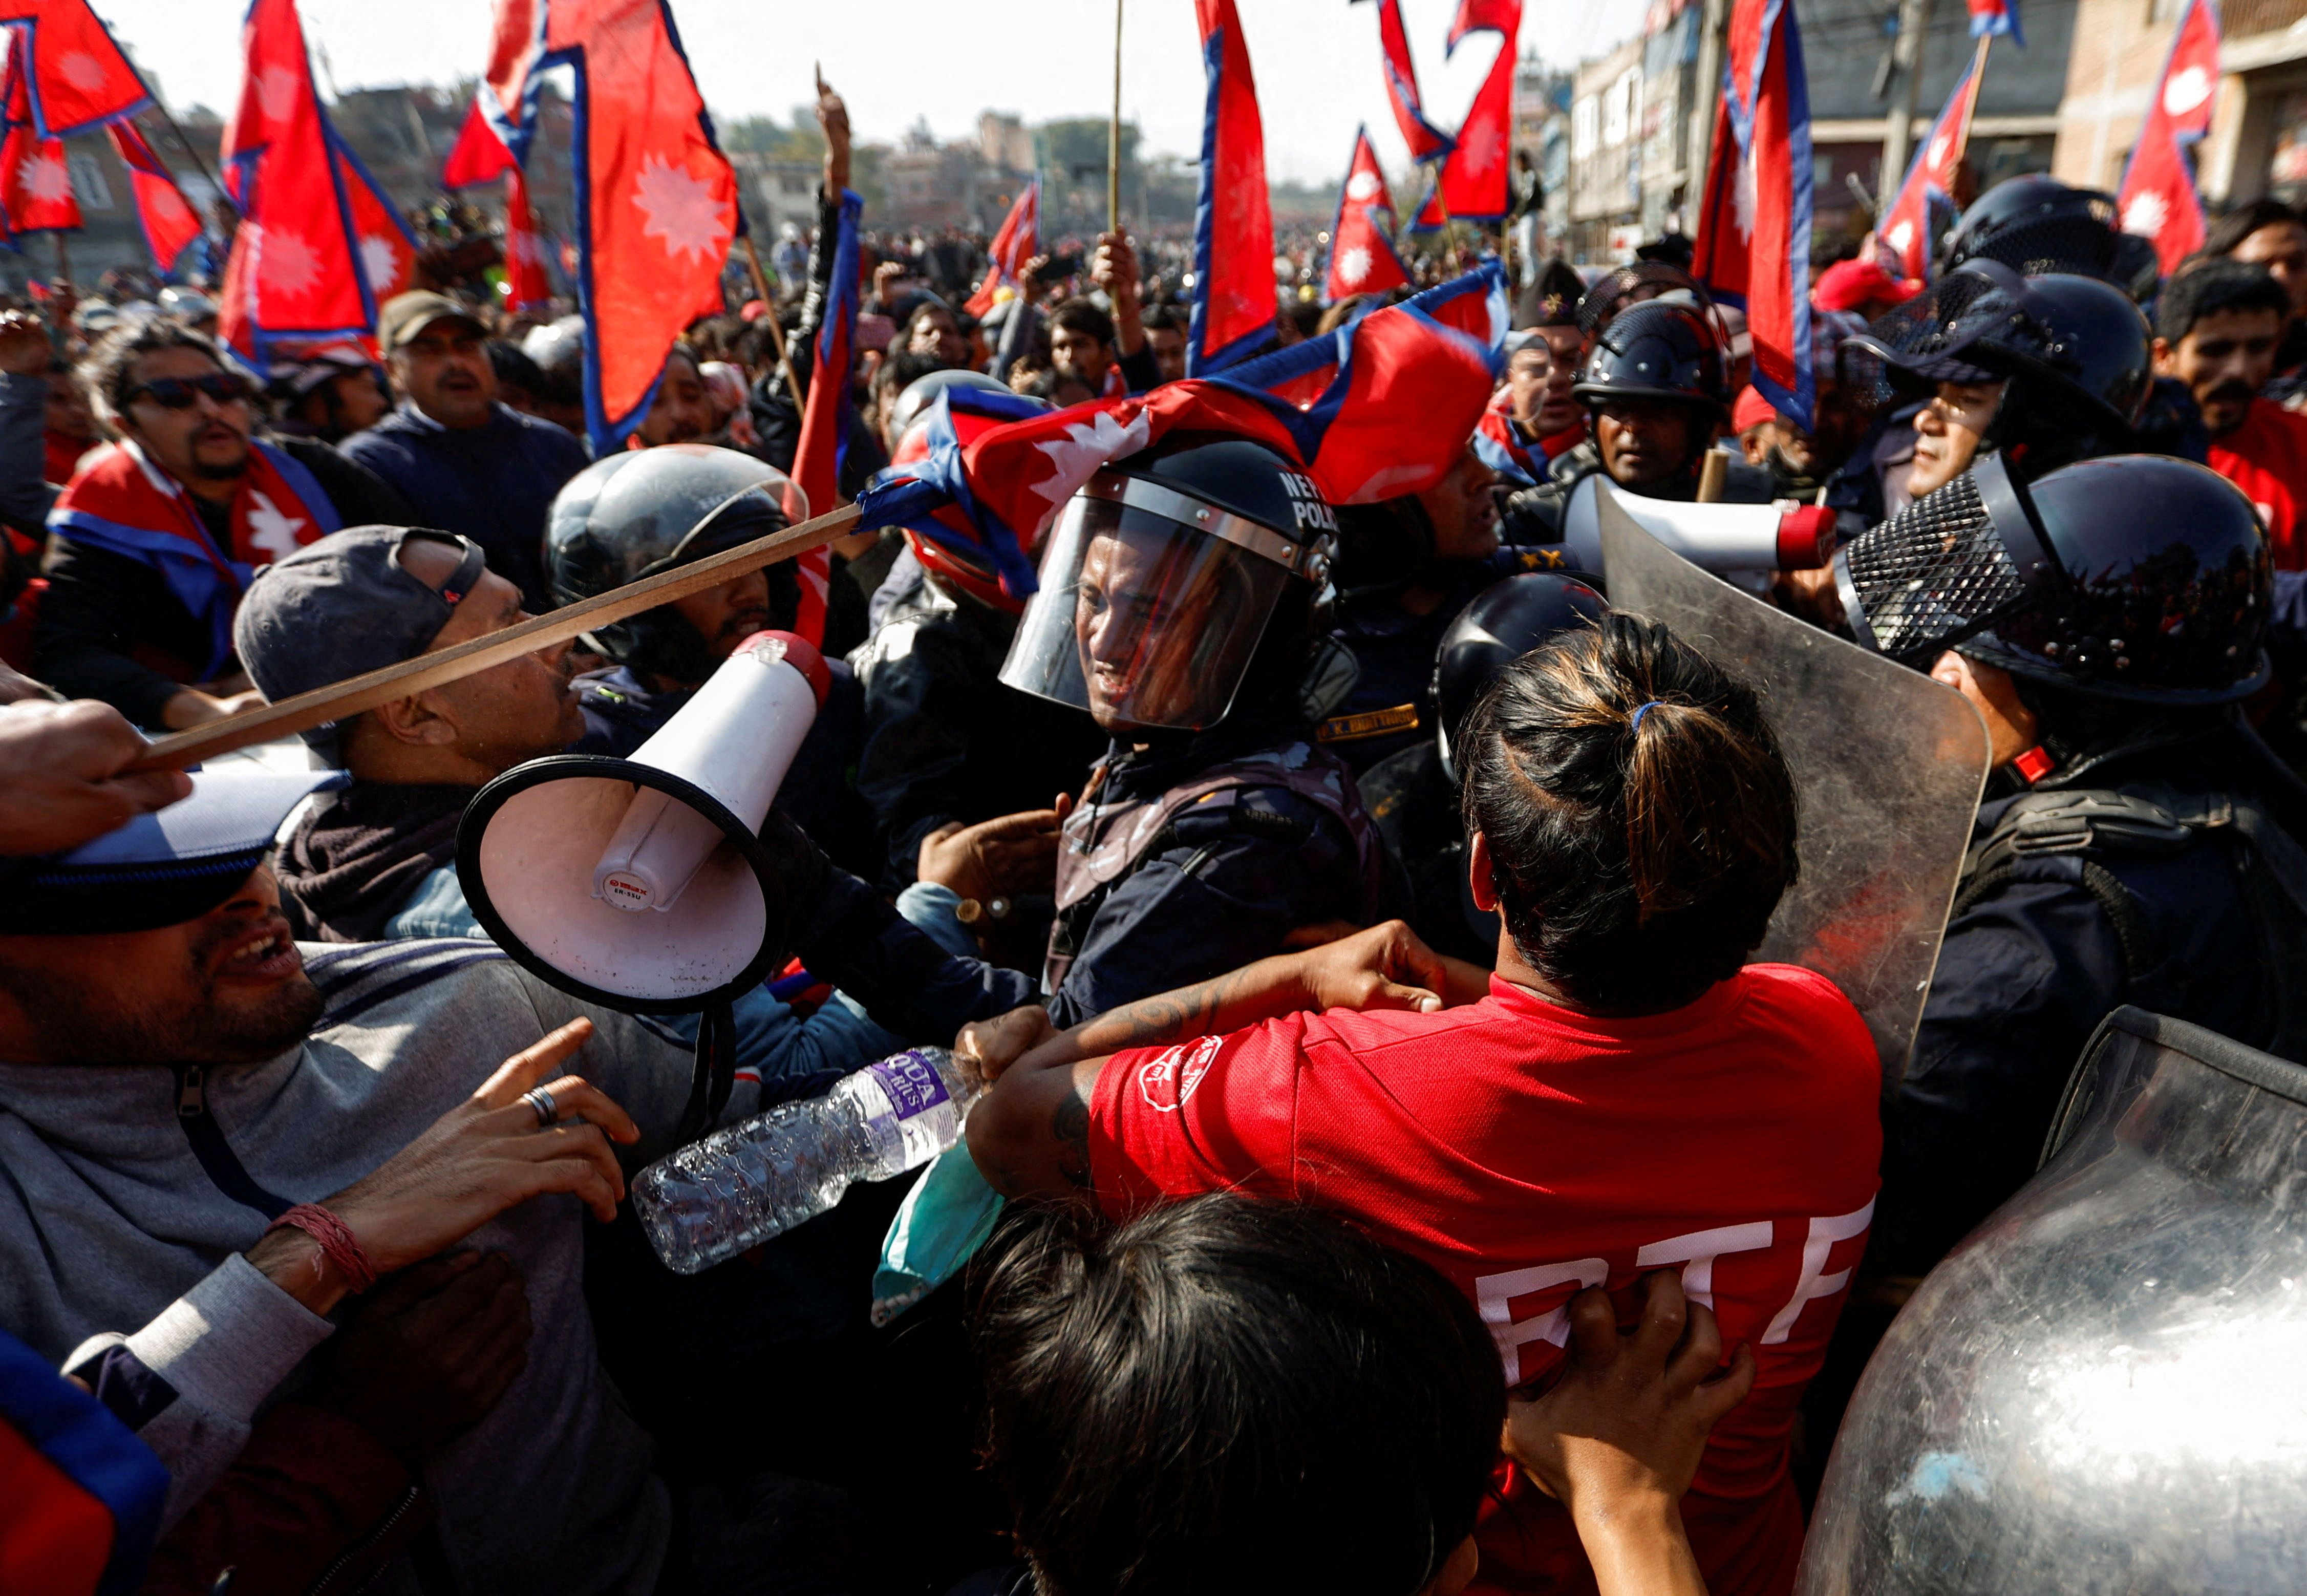 Pro-monarchist protesters clash with police in Nepal